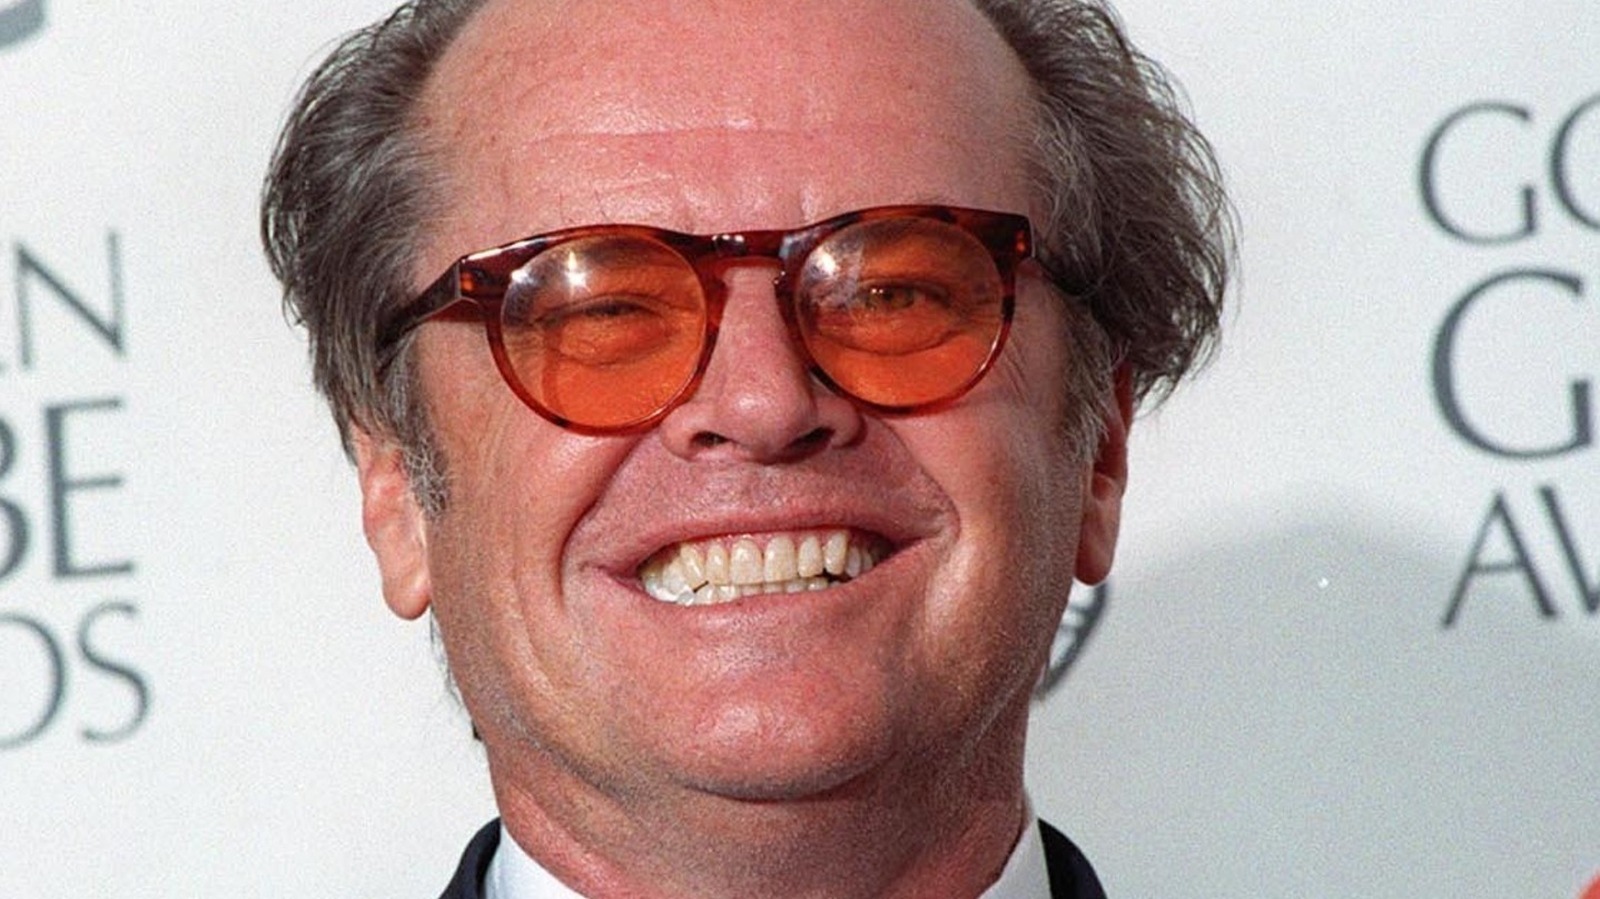 grocery store Final Importance The Real Reason Jack Nicholson Always Wears Sunglasses